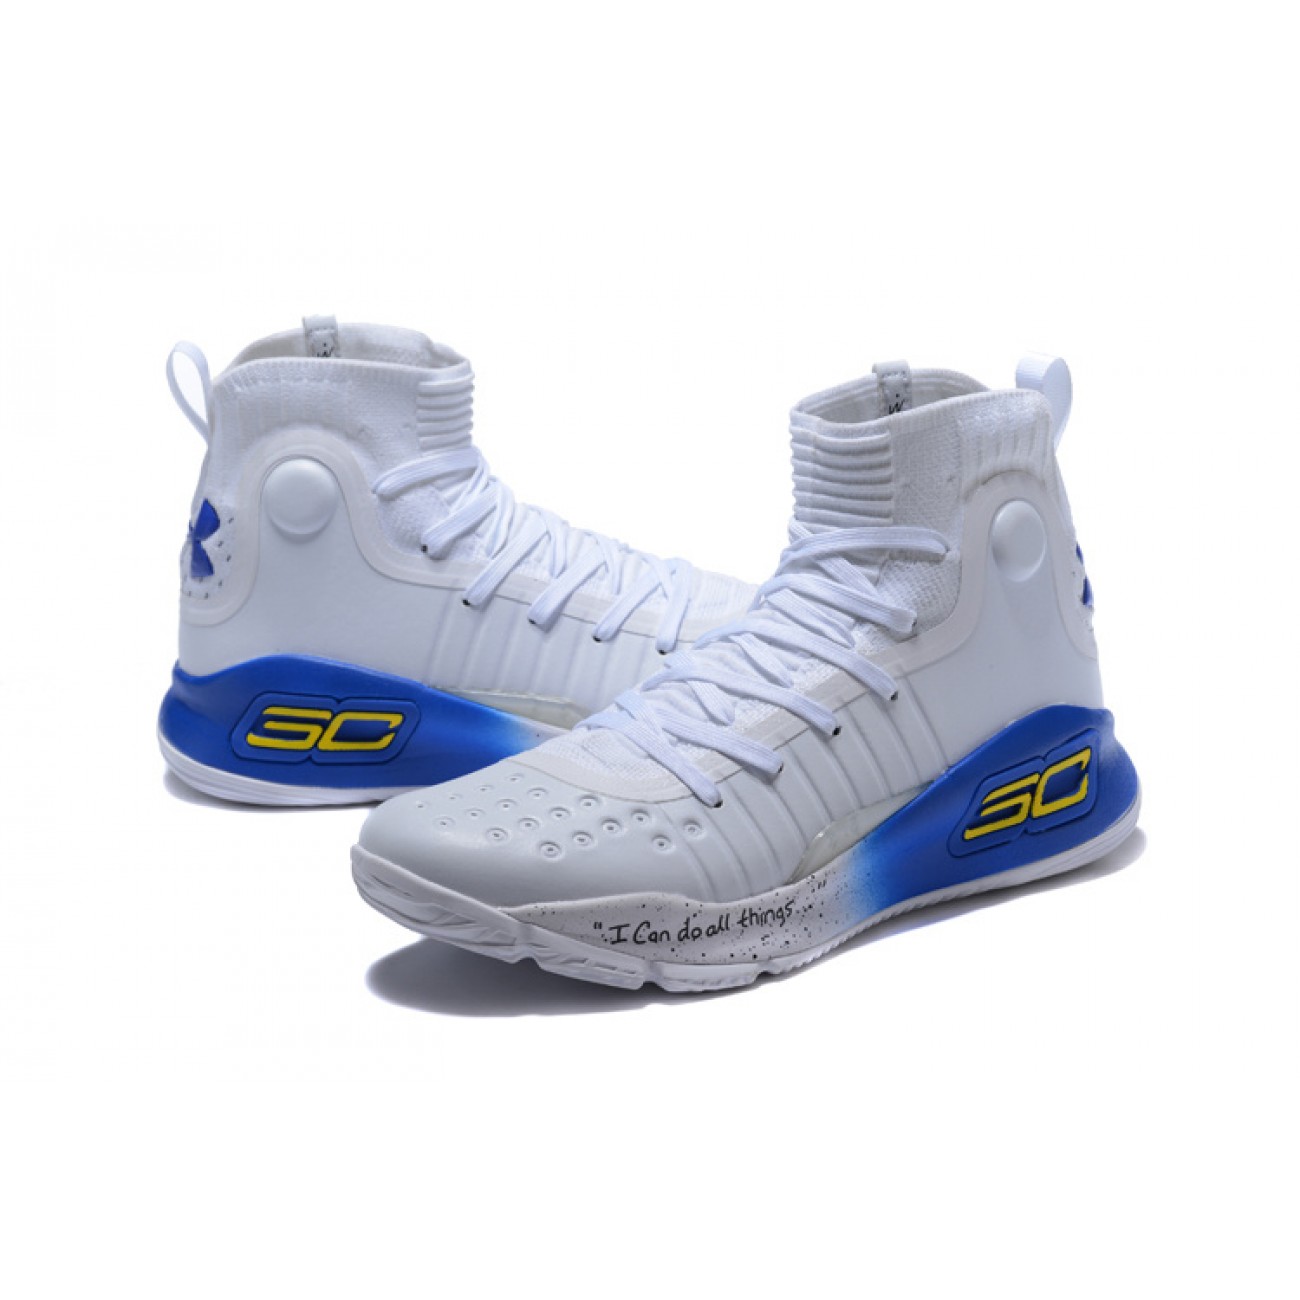 Under Armour UA Curry 4 "I Can Do All Things" White/Blue